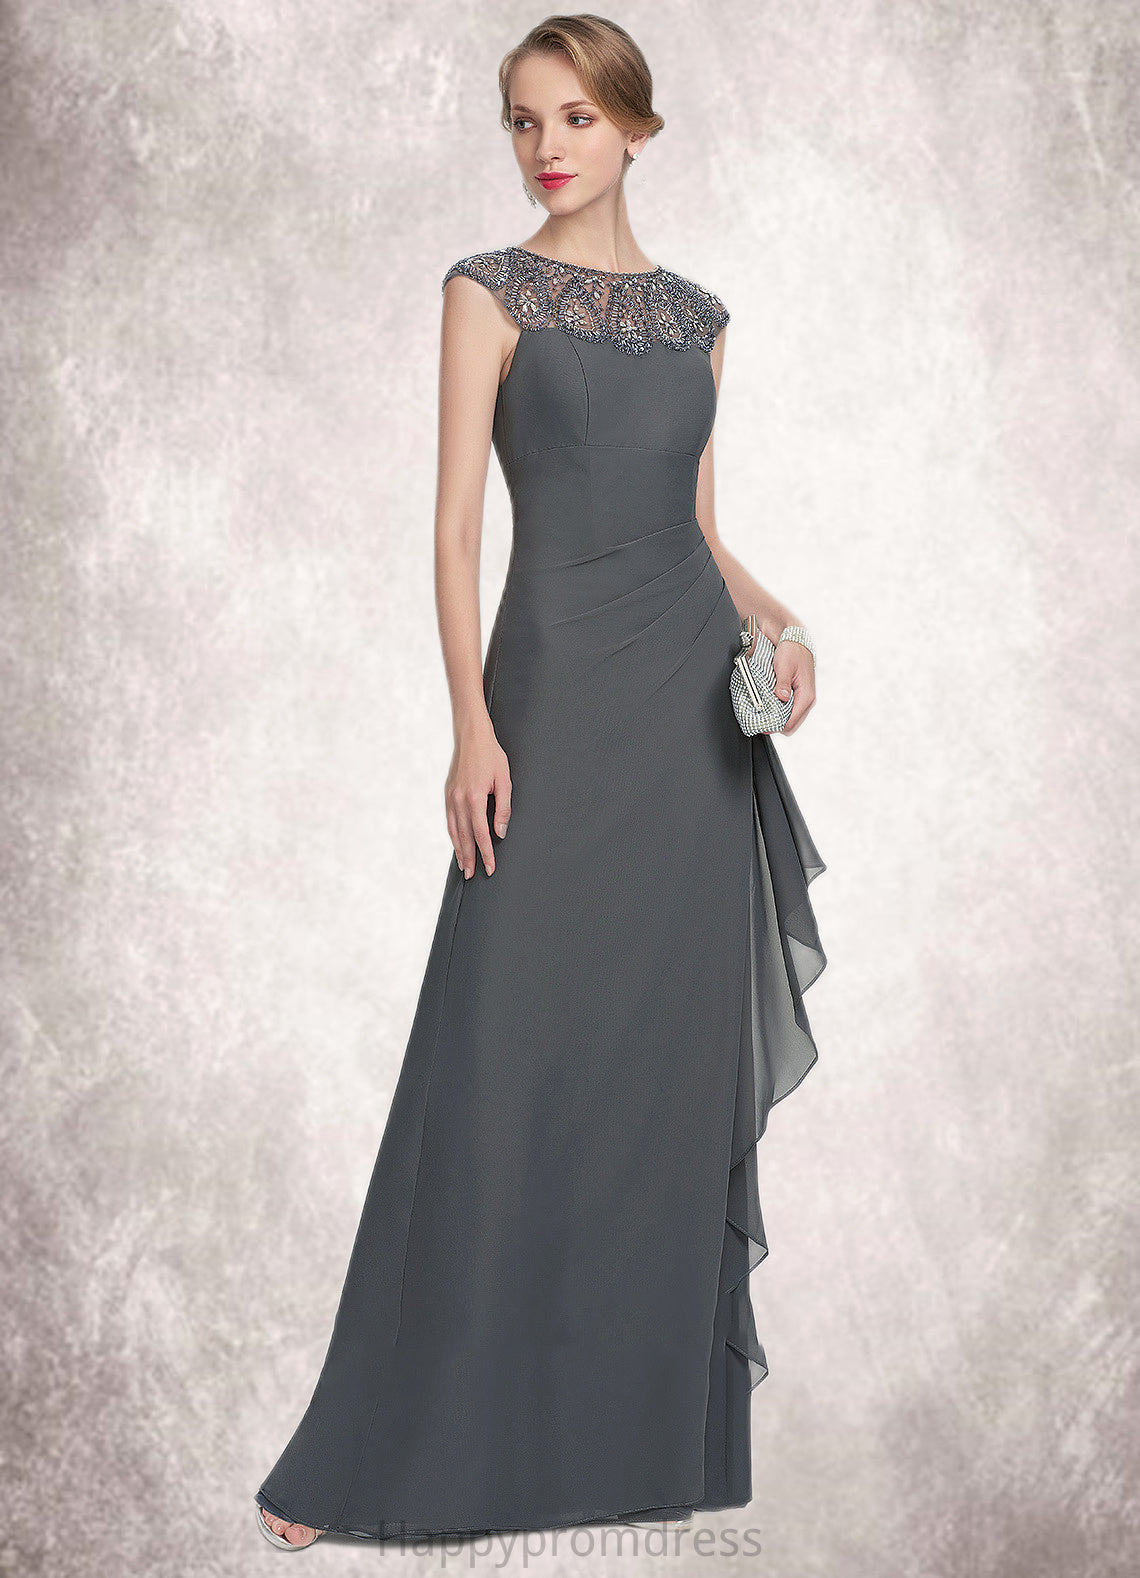 Alissa A-Line Scoop Neck Floor-Length Chiffon Mother of the Bride Dress With Beading Sequins Cascading Ruffles XXS126P0014721